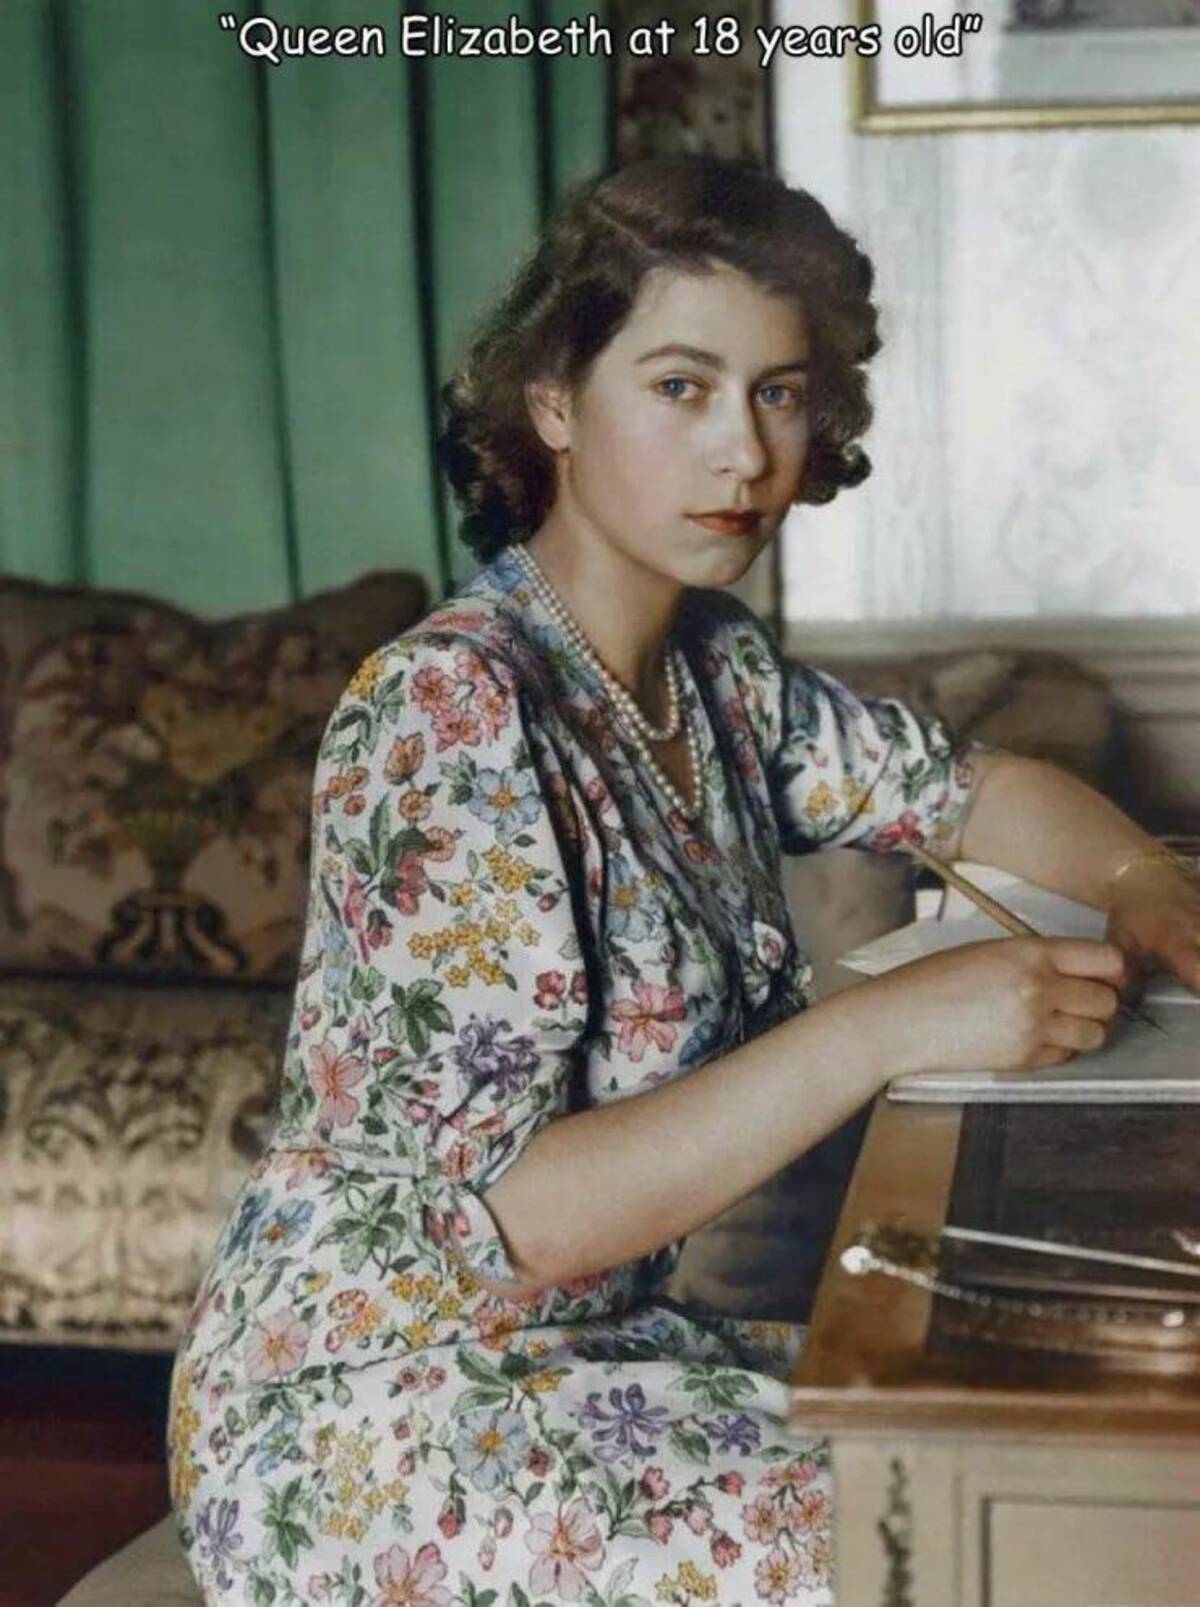 most beautiful picture of the queen elizabeth - "Queen Elizabeth at 18 years old"